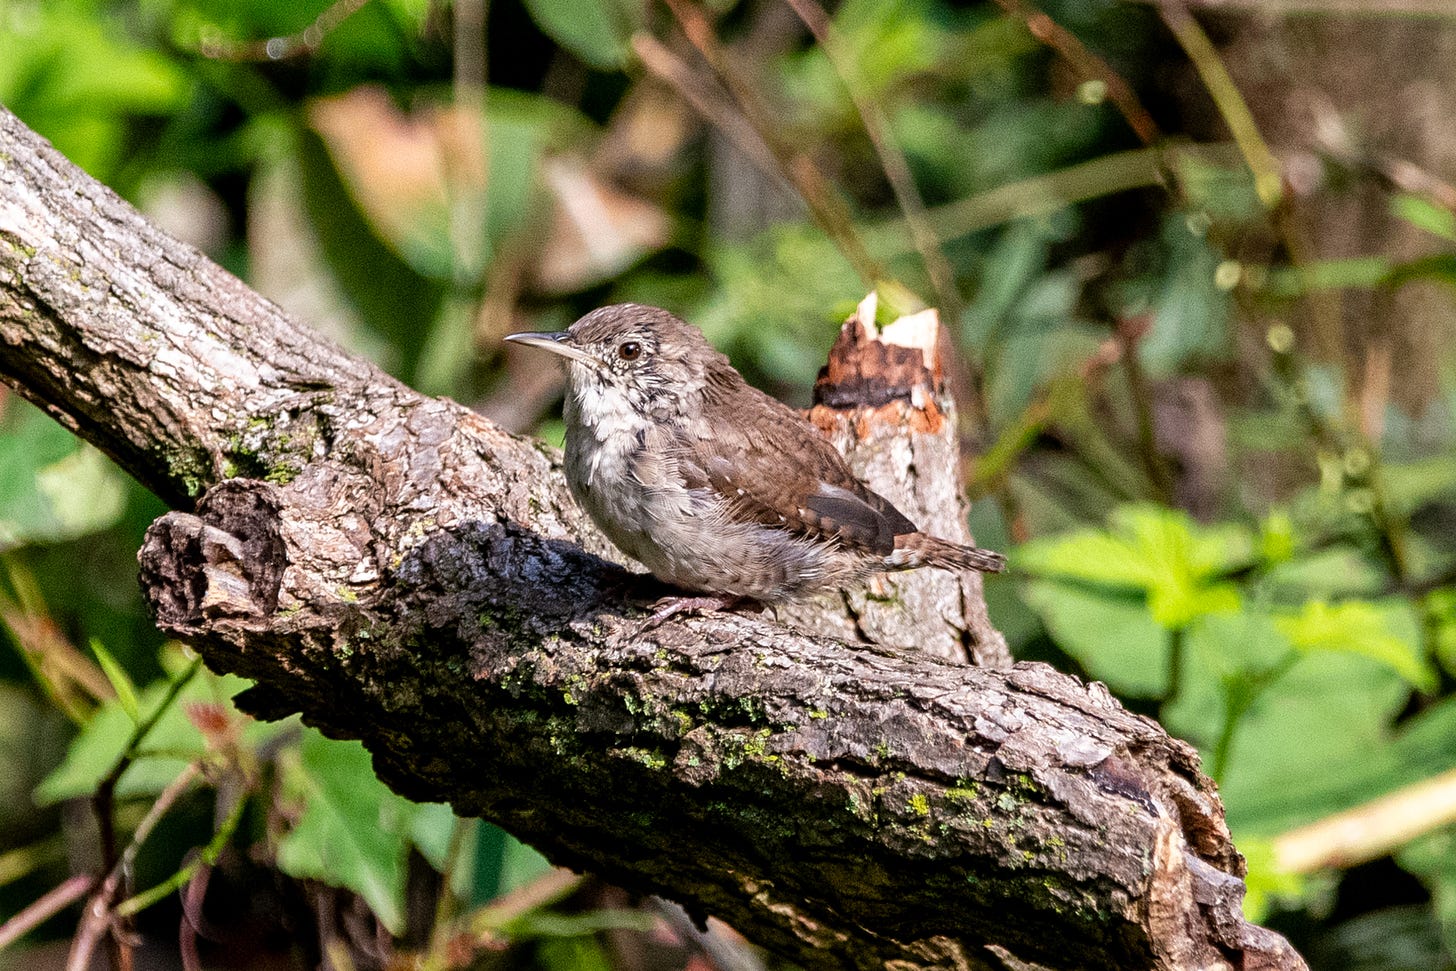 A somewhat blotchy house wren, perched on a dead branch in profile